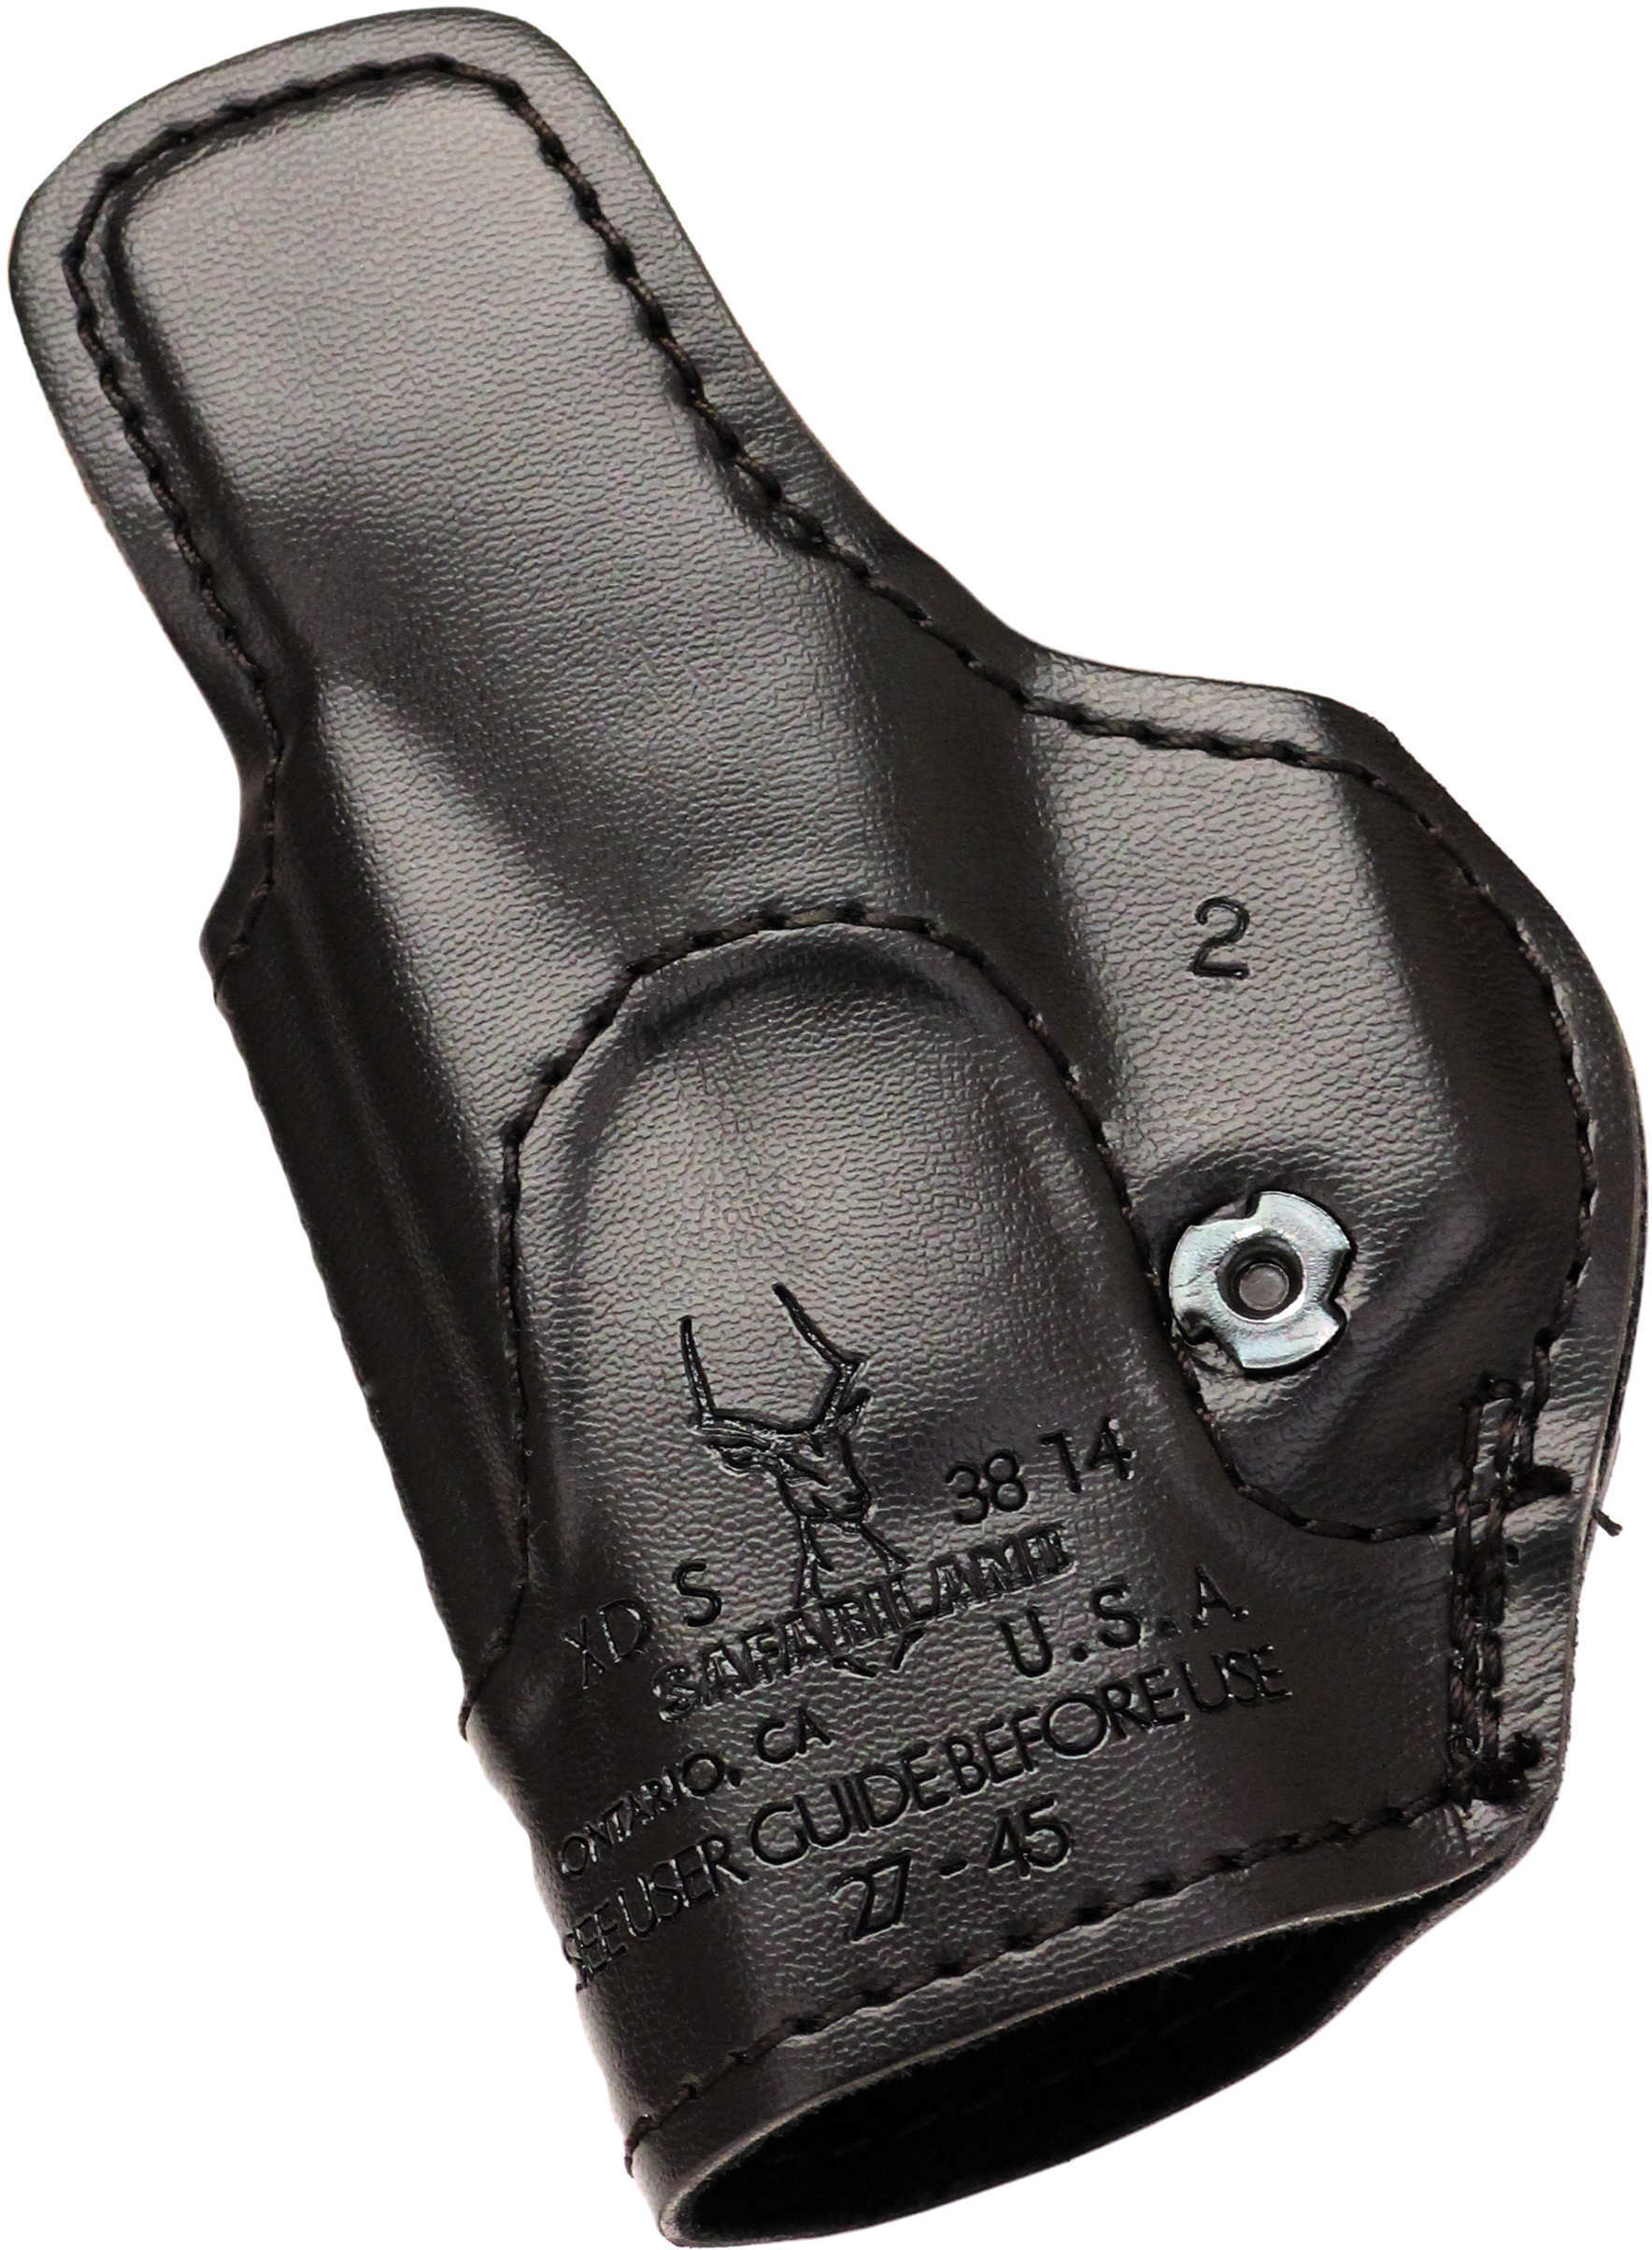 Safariland Inside the Pocket Holster XDS Compact STX, Plain Black Md: 27-45-61